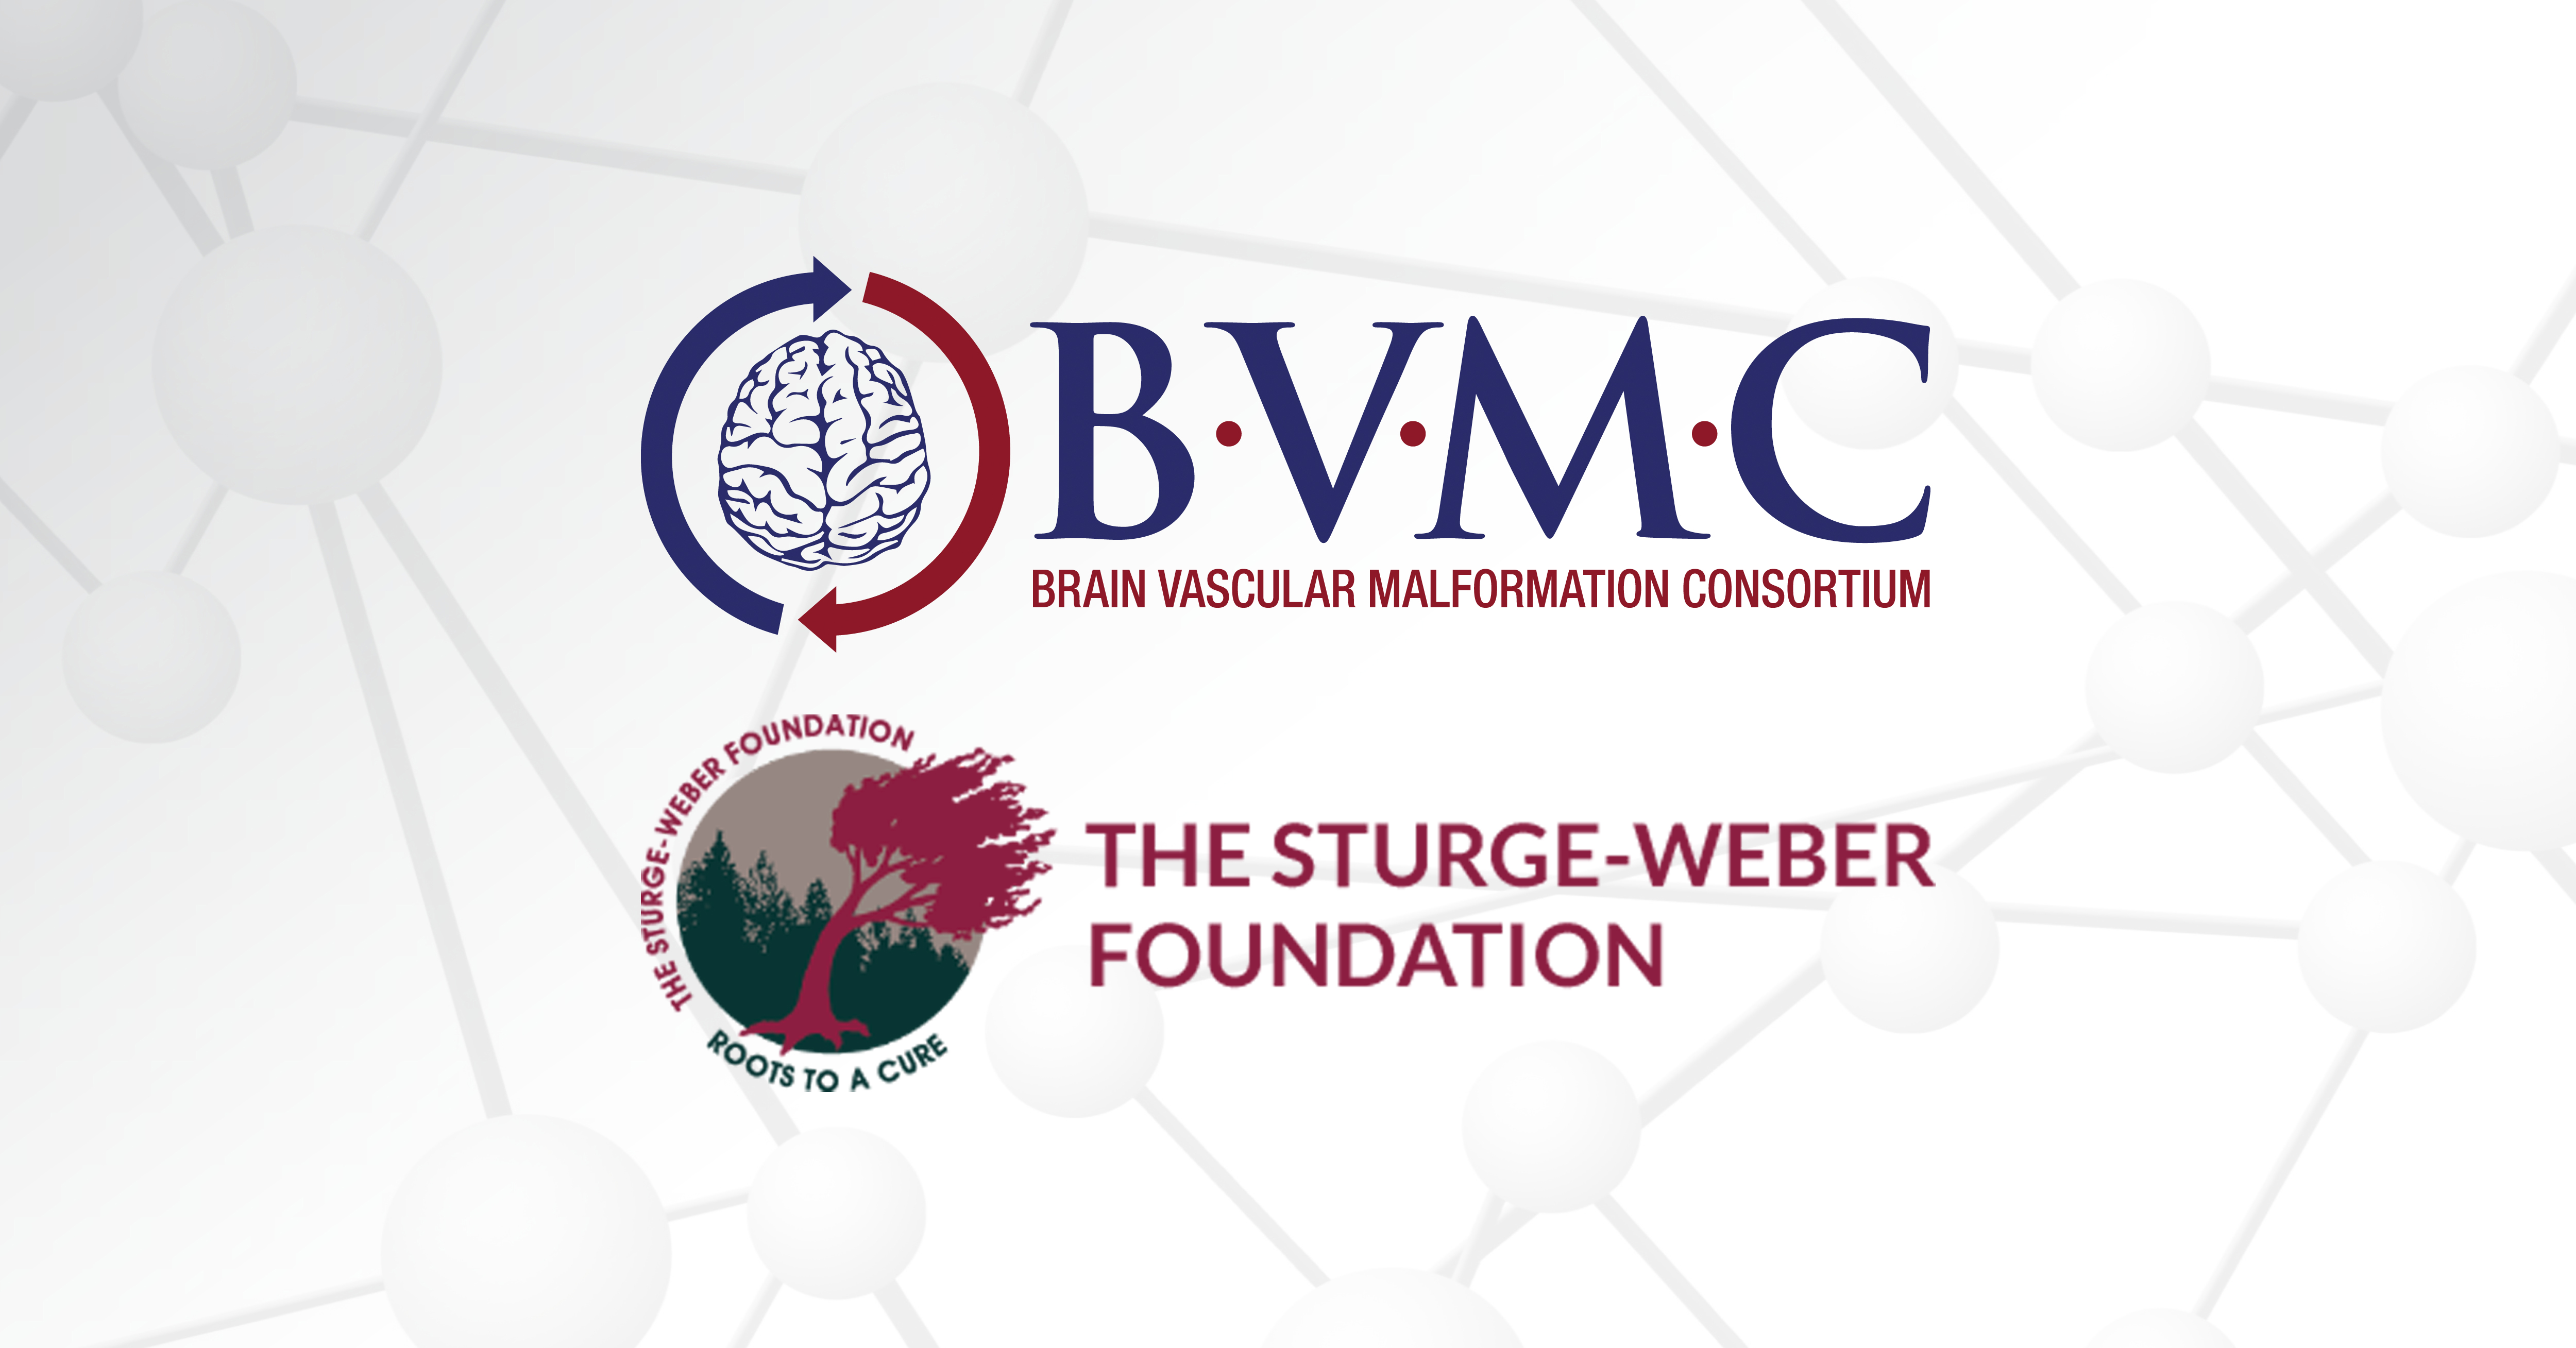 The BVMC and Sturge-Weber Foundation logos appear over a gray graphic of molecules